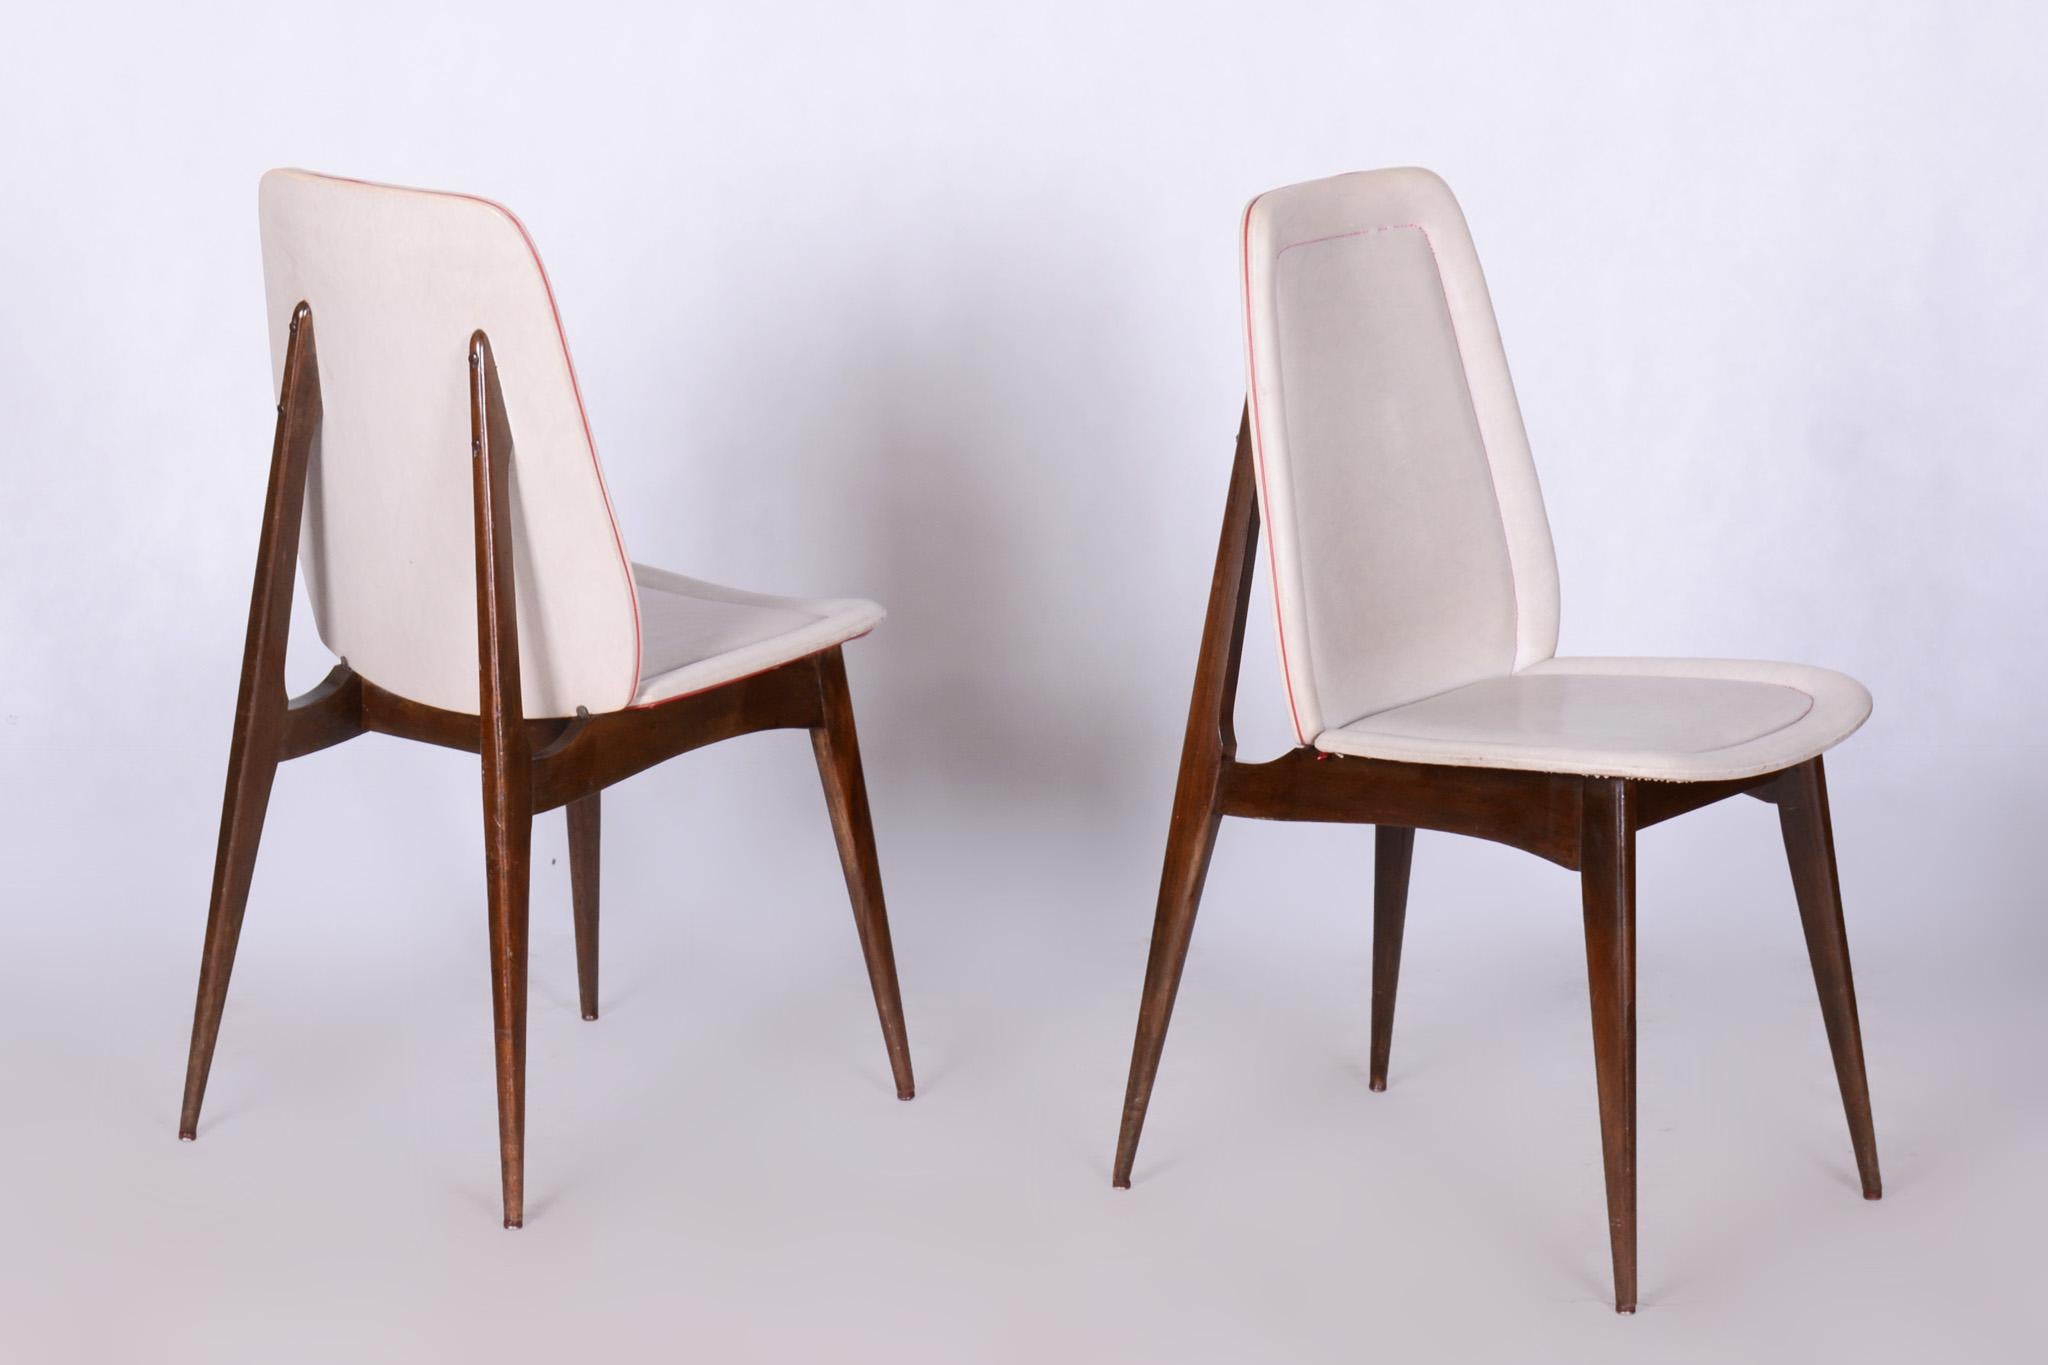 Six Original Art Deco Chairs, by Jules Leleu, Revived Polish, France, 1940s For Sale 2